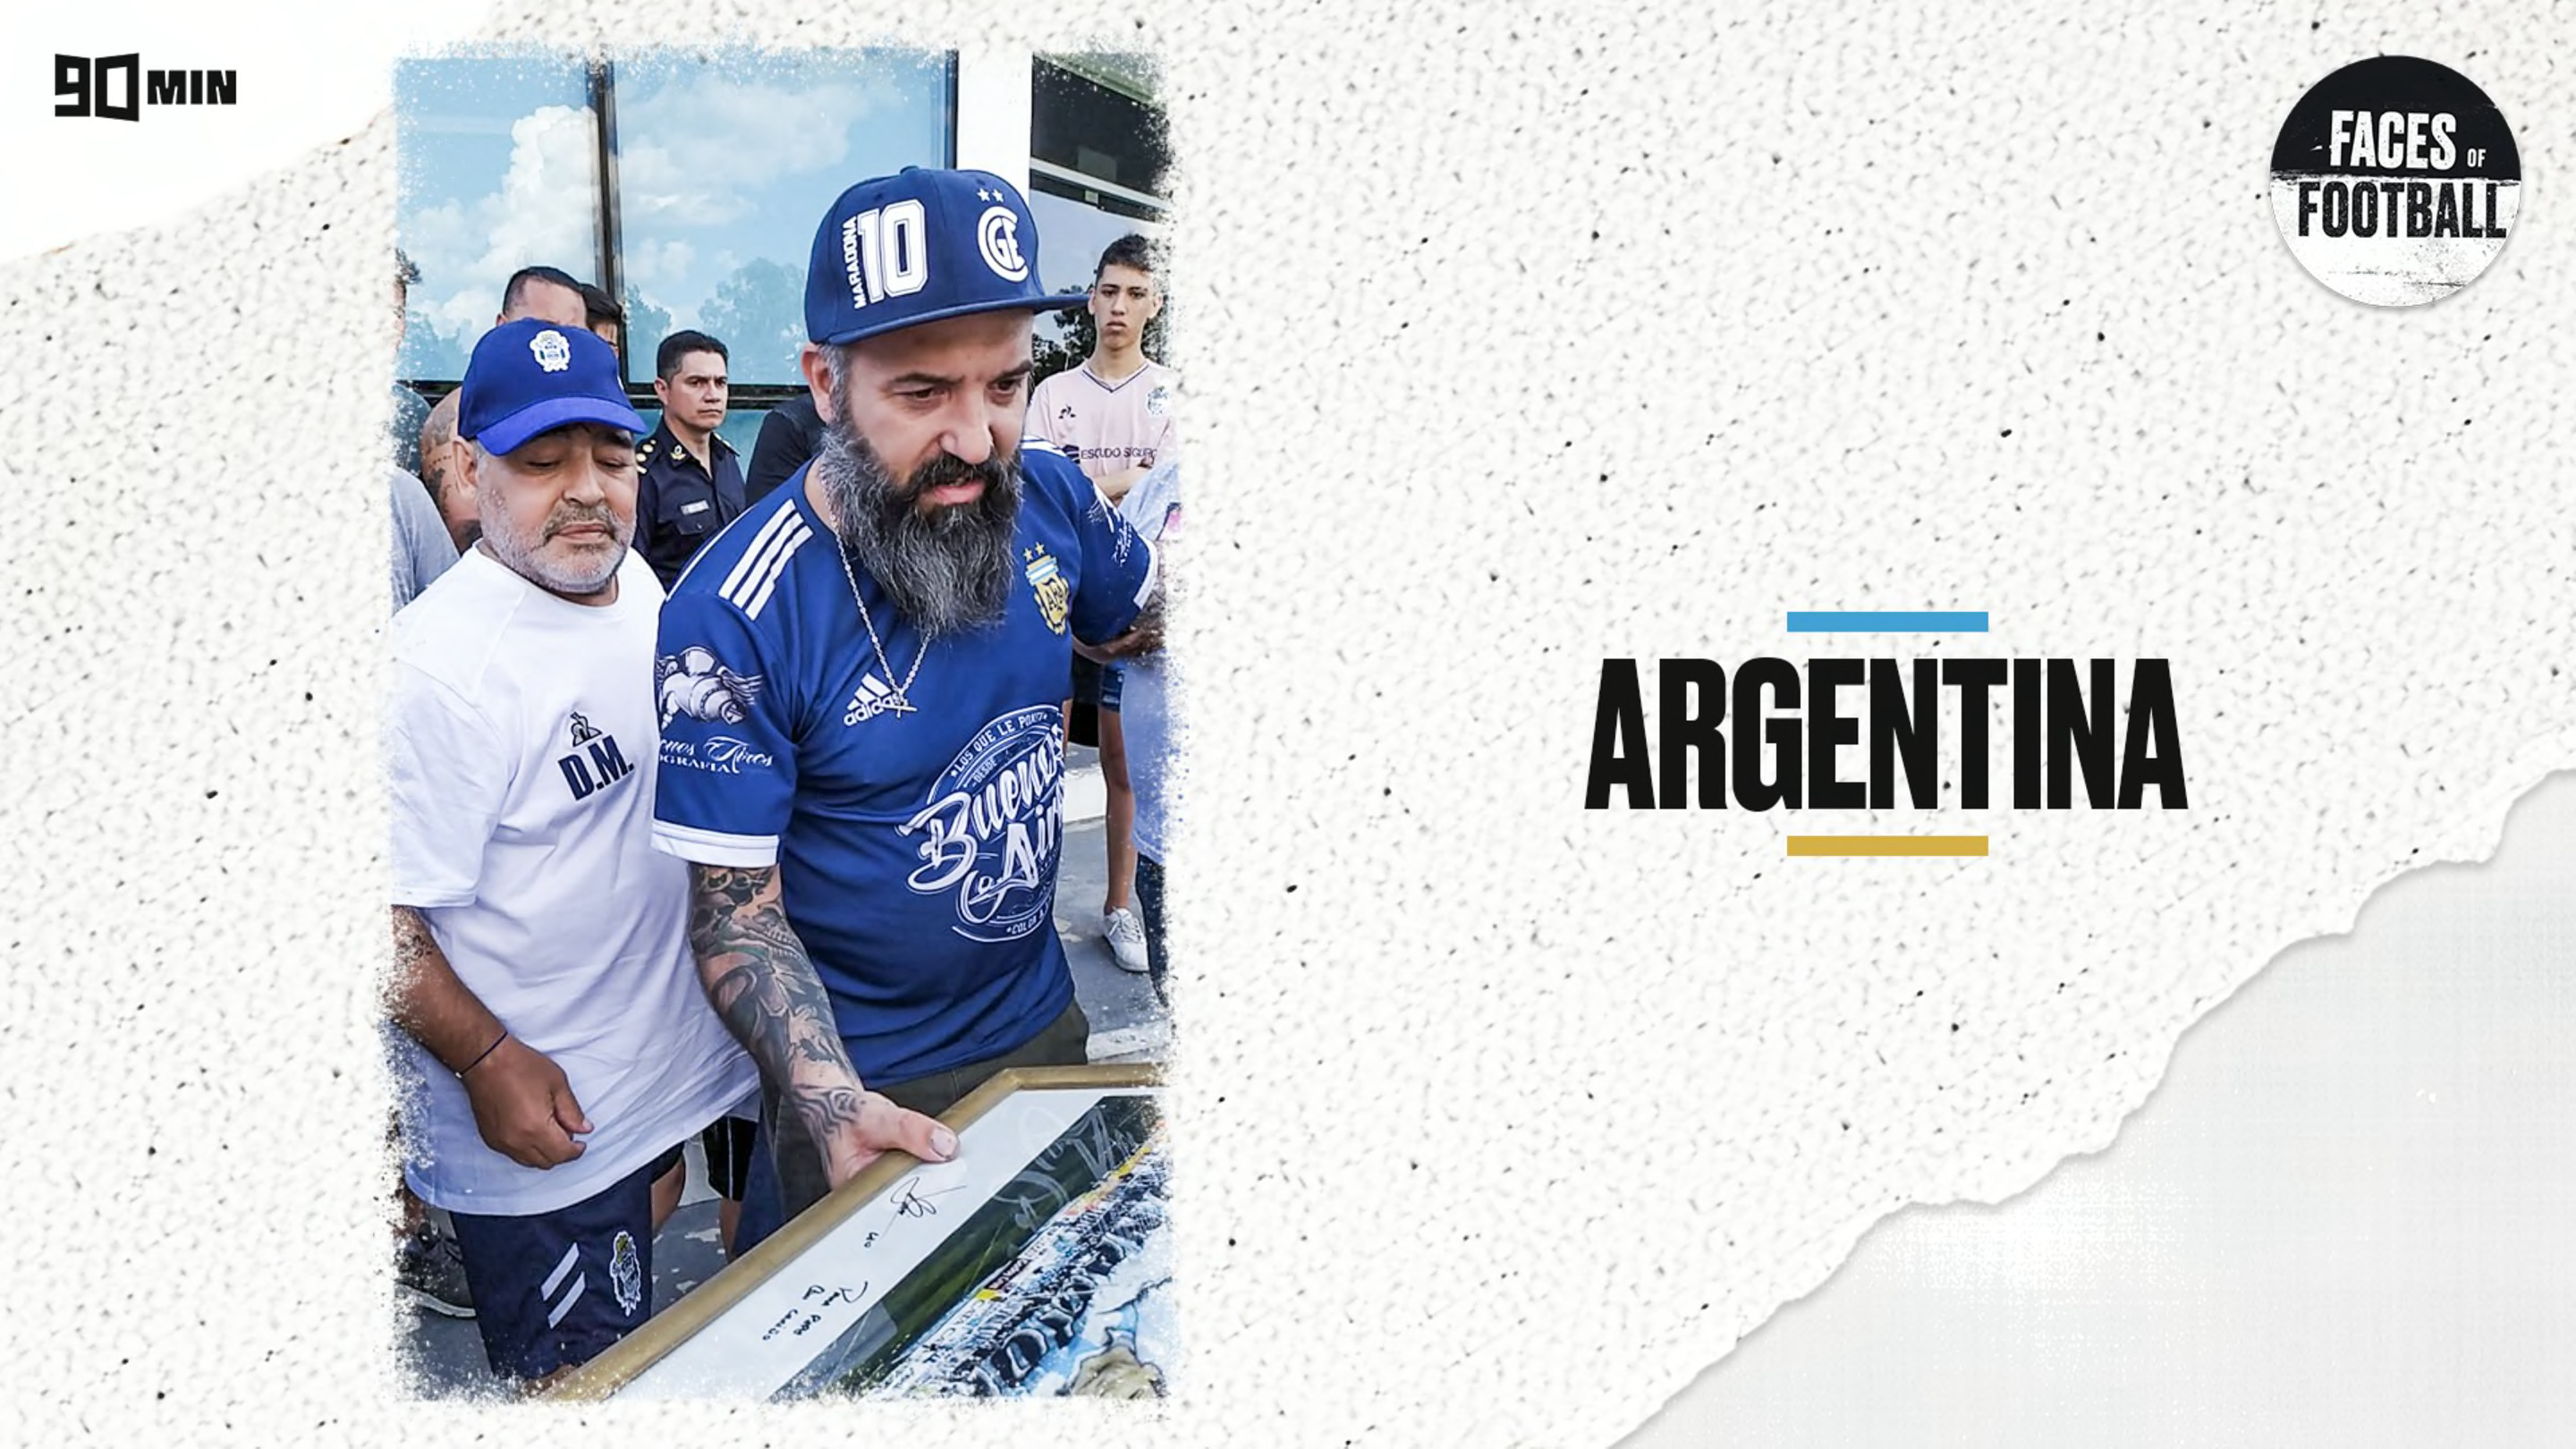 Faces of Football: Argentina - a letter to the national team